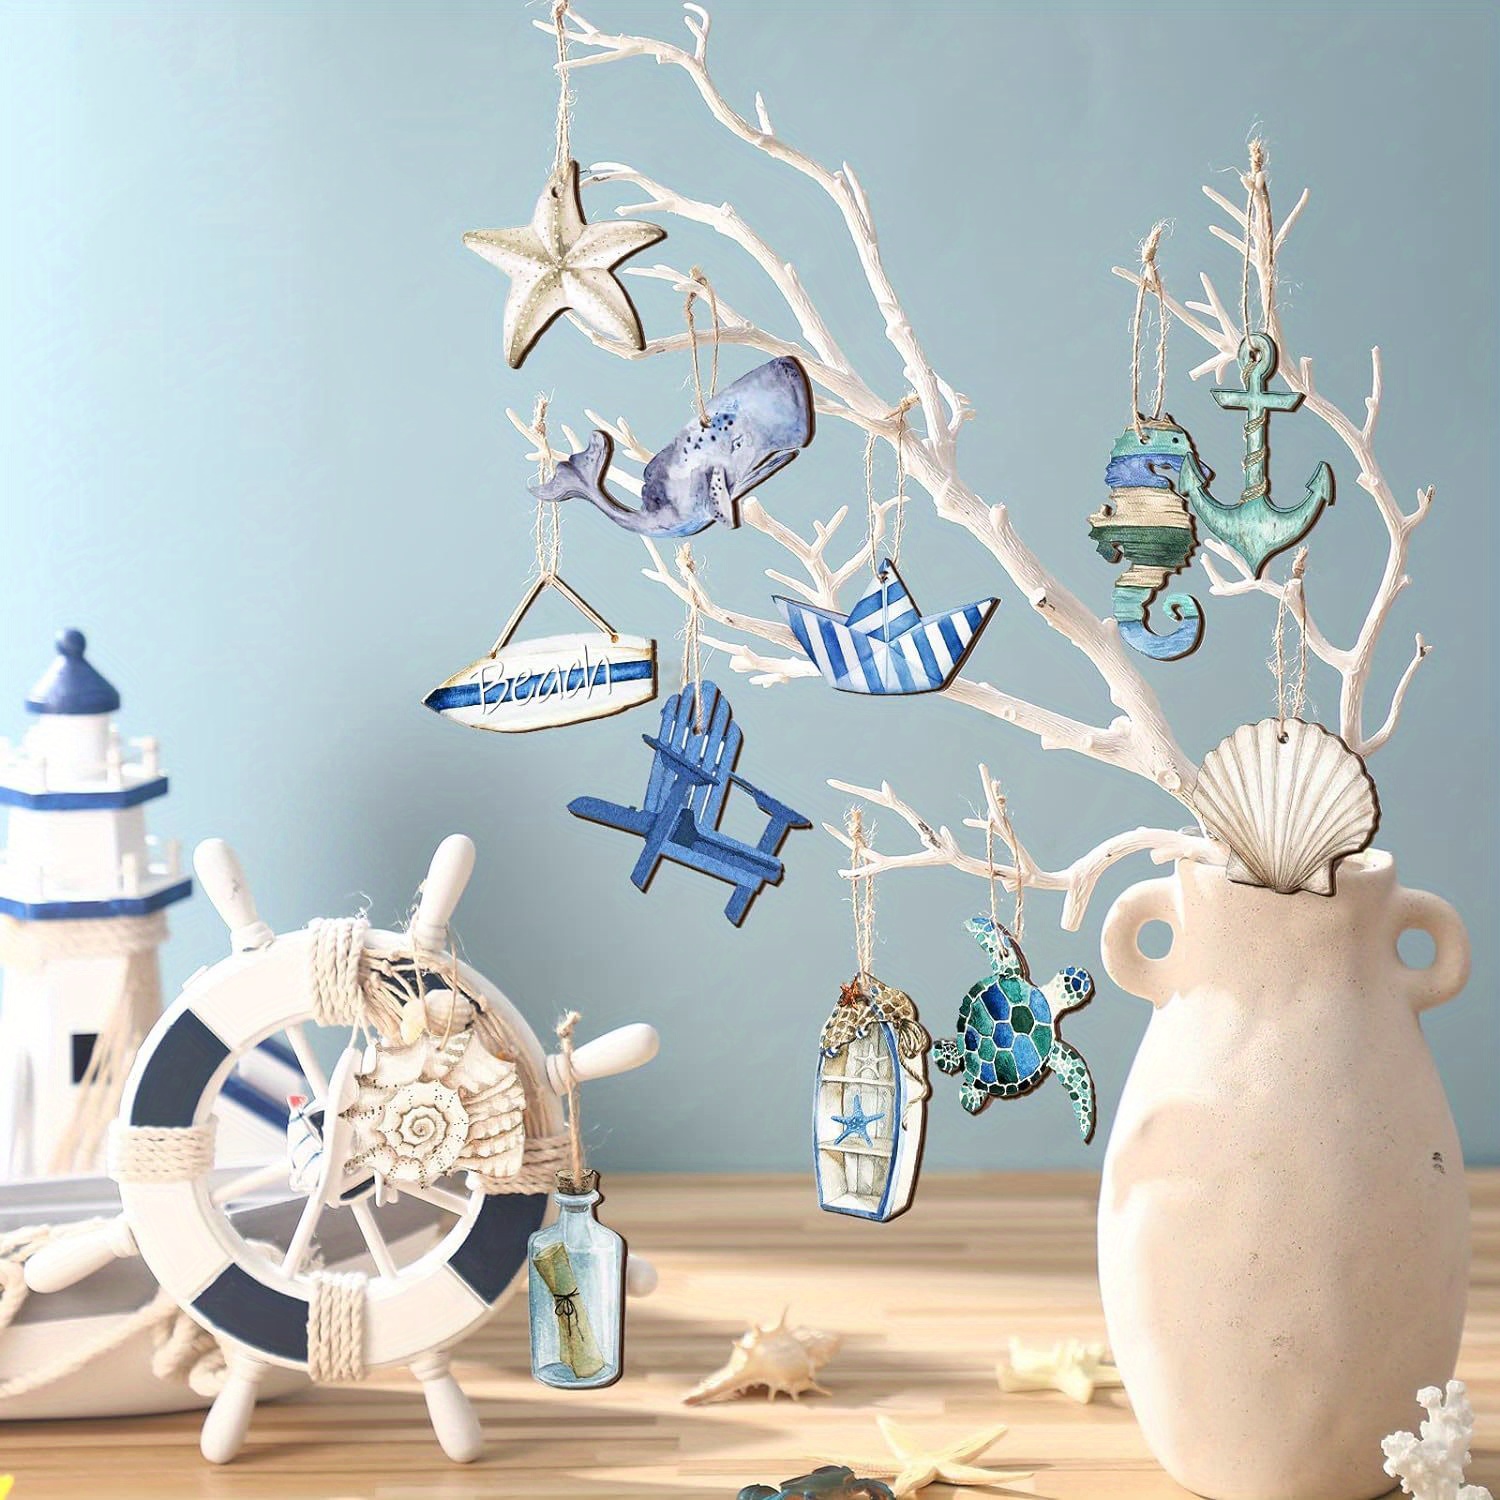 24pcs Wooden Nautical Ornaments Nautical Hanging Decorations Wood Beach  Tree Ornaments Miniature for Home Mini Anchor Life Ring Sea Star Sailboat  for